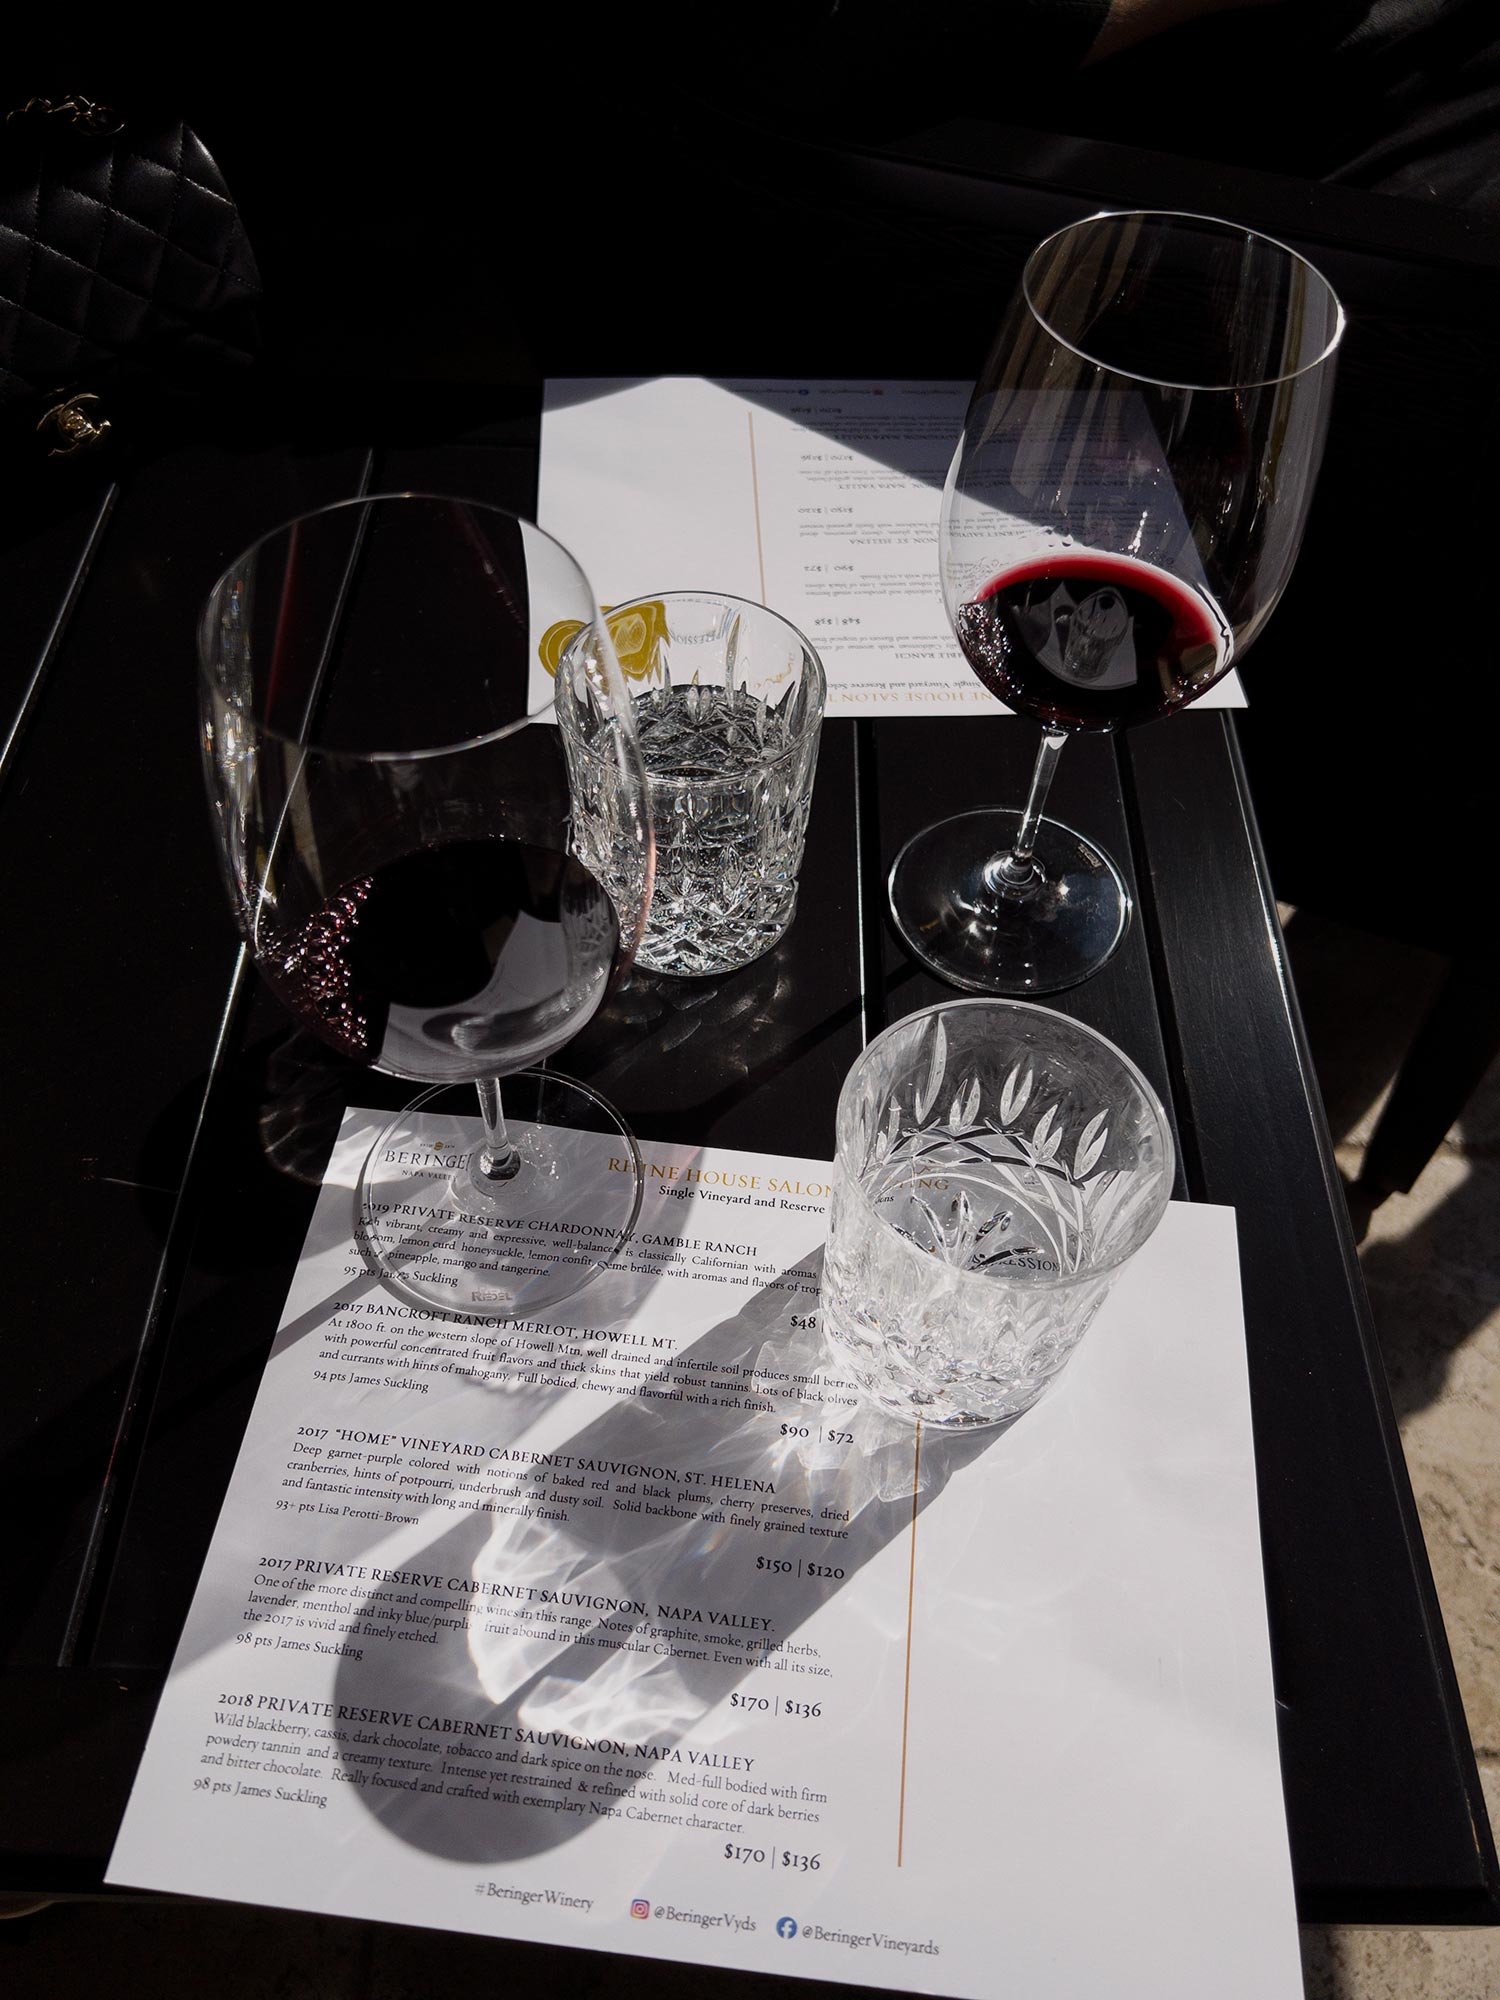 The wine tasting on the veranda of the Rhine House was sunny, bright, and so much fun!